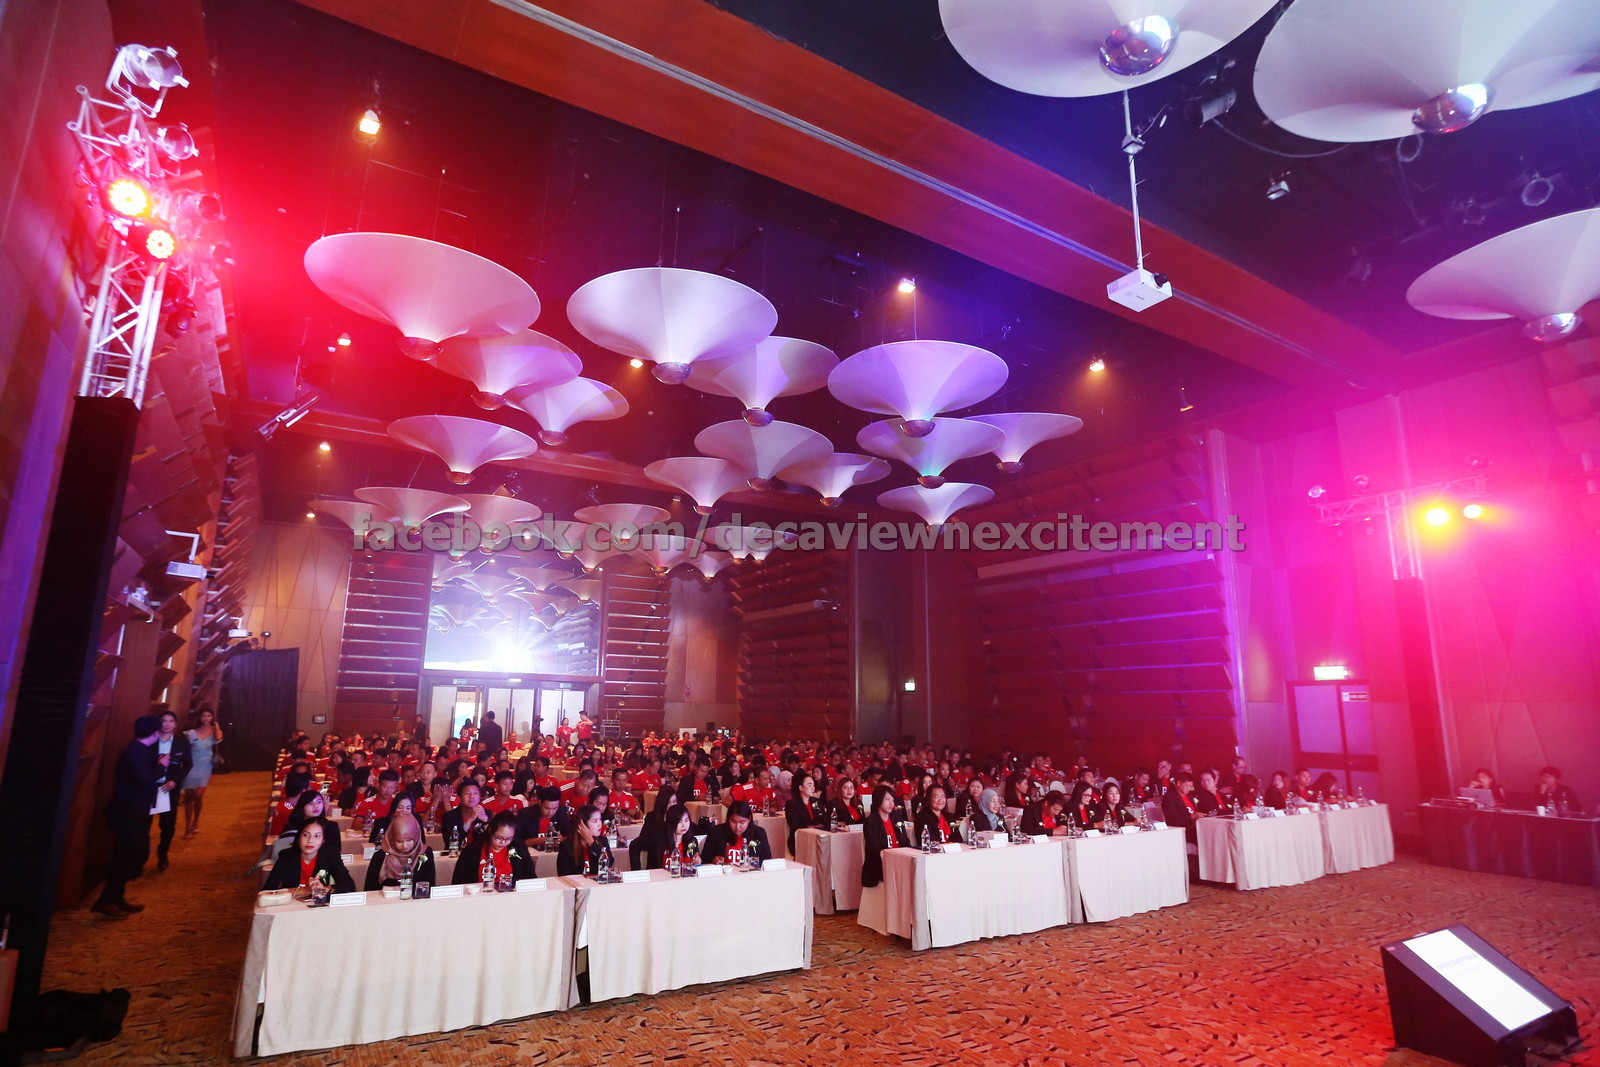 Decaview and Nexcitement Event Planner manages a turnkey national-level sales conference which includes hundreds of members across the country